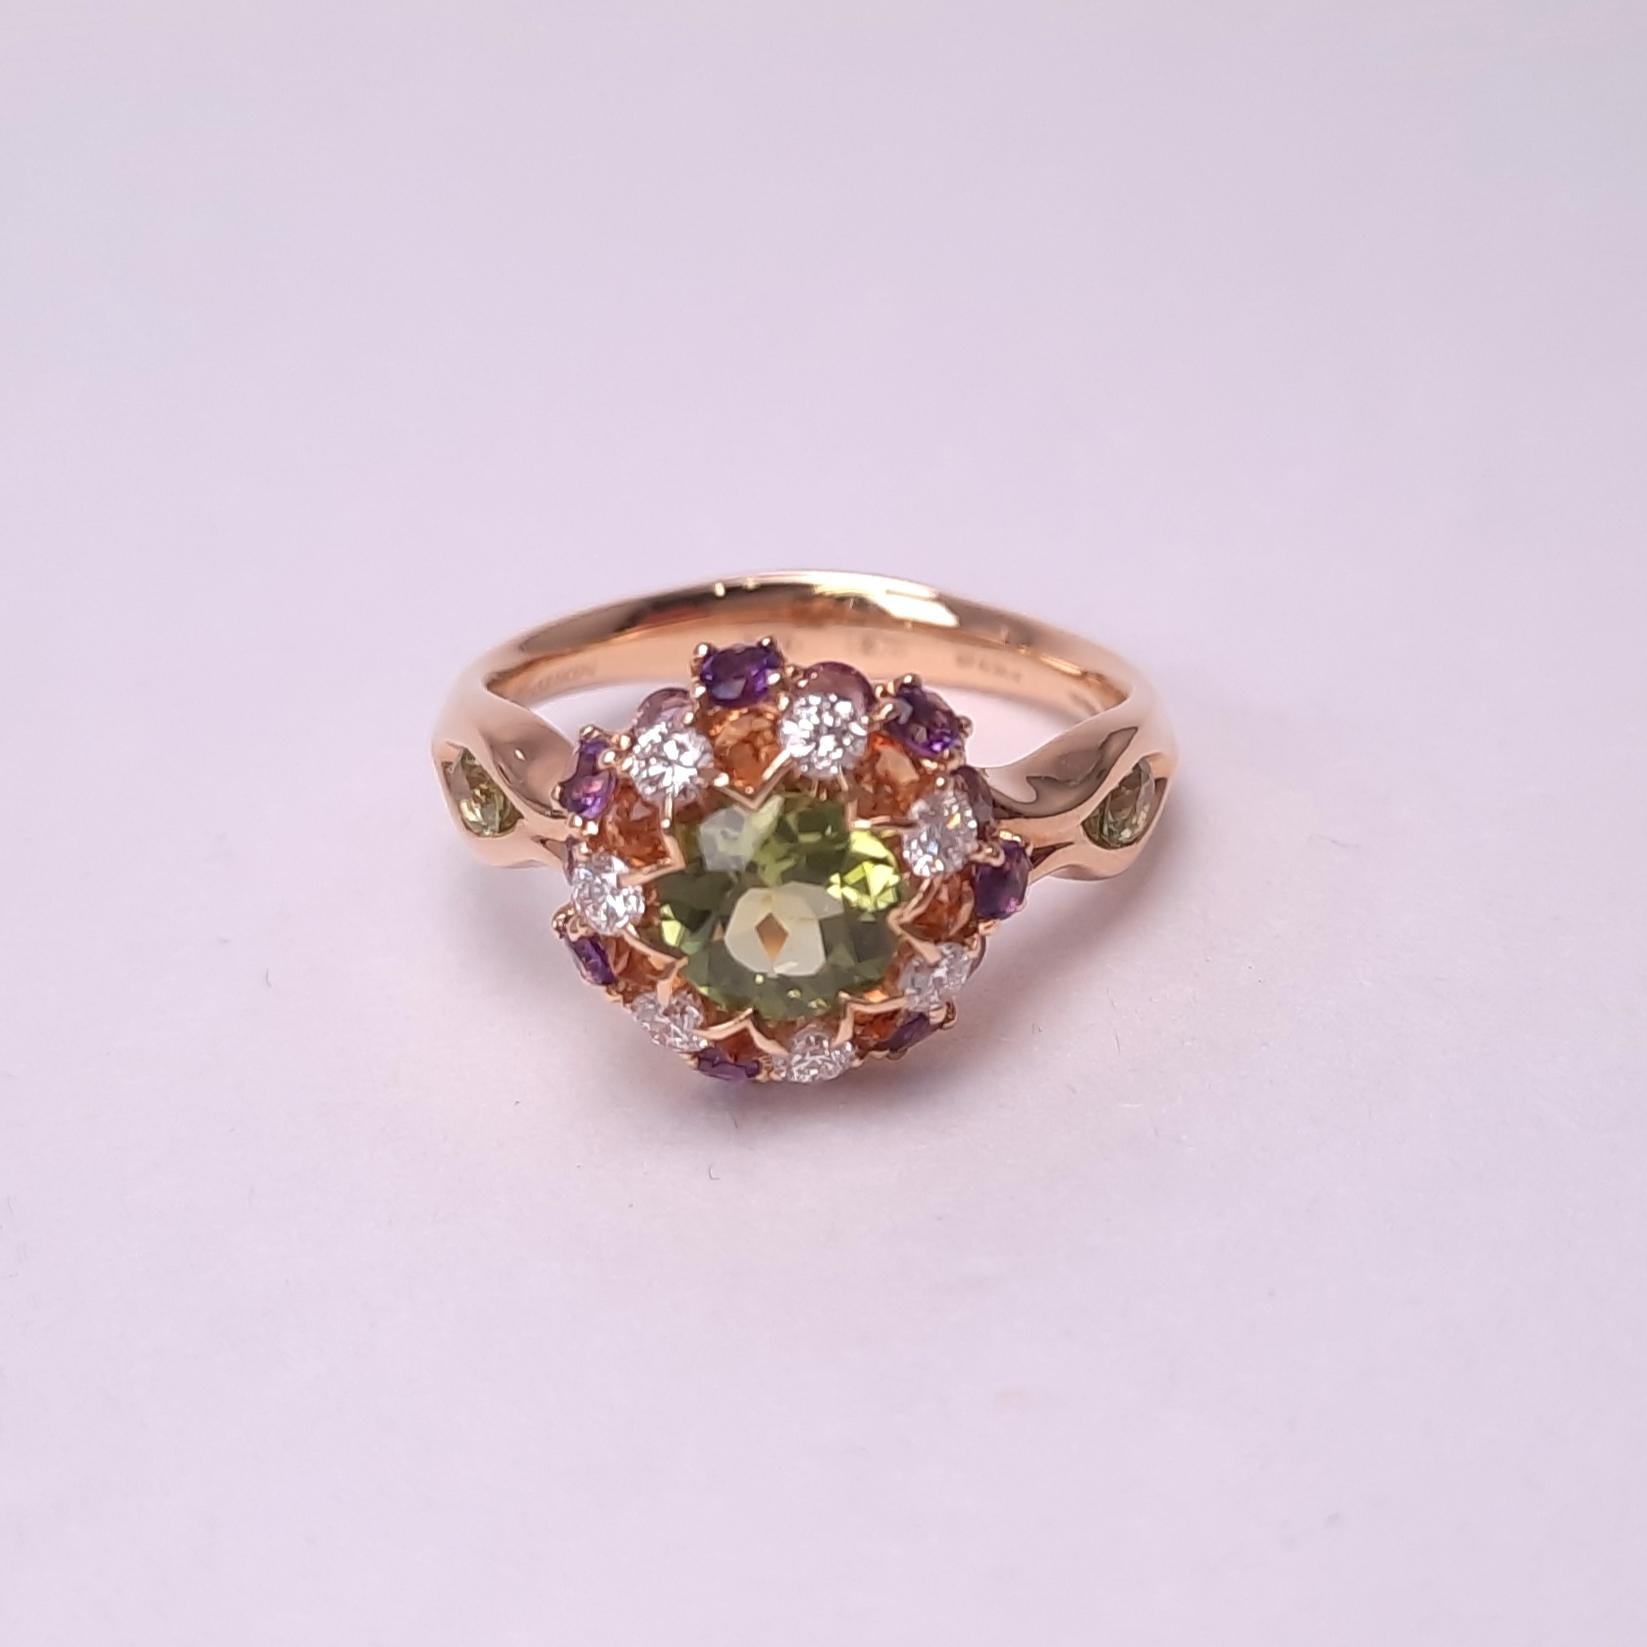 The combination of energetic bright peridot, graceful amethyst, and dazzling diamonds are used in the MOISEIKIN's Aurora collection, elaborating with a creative approach of an upside-down setting. Strictly selected precise stones reflect the light,